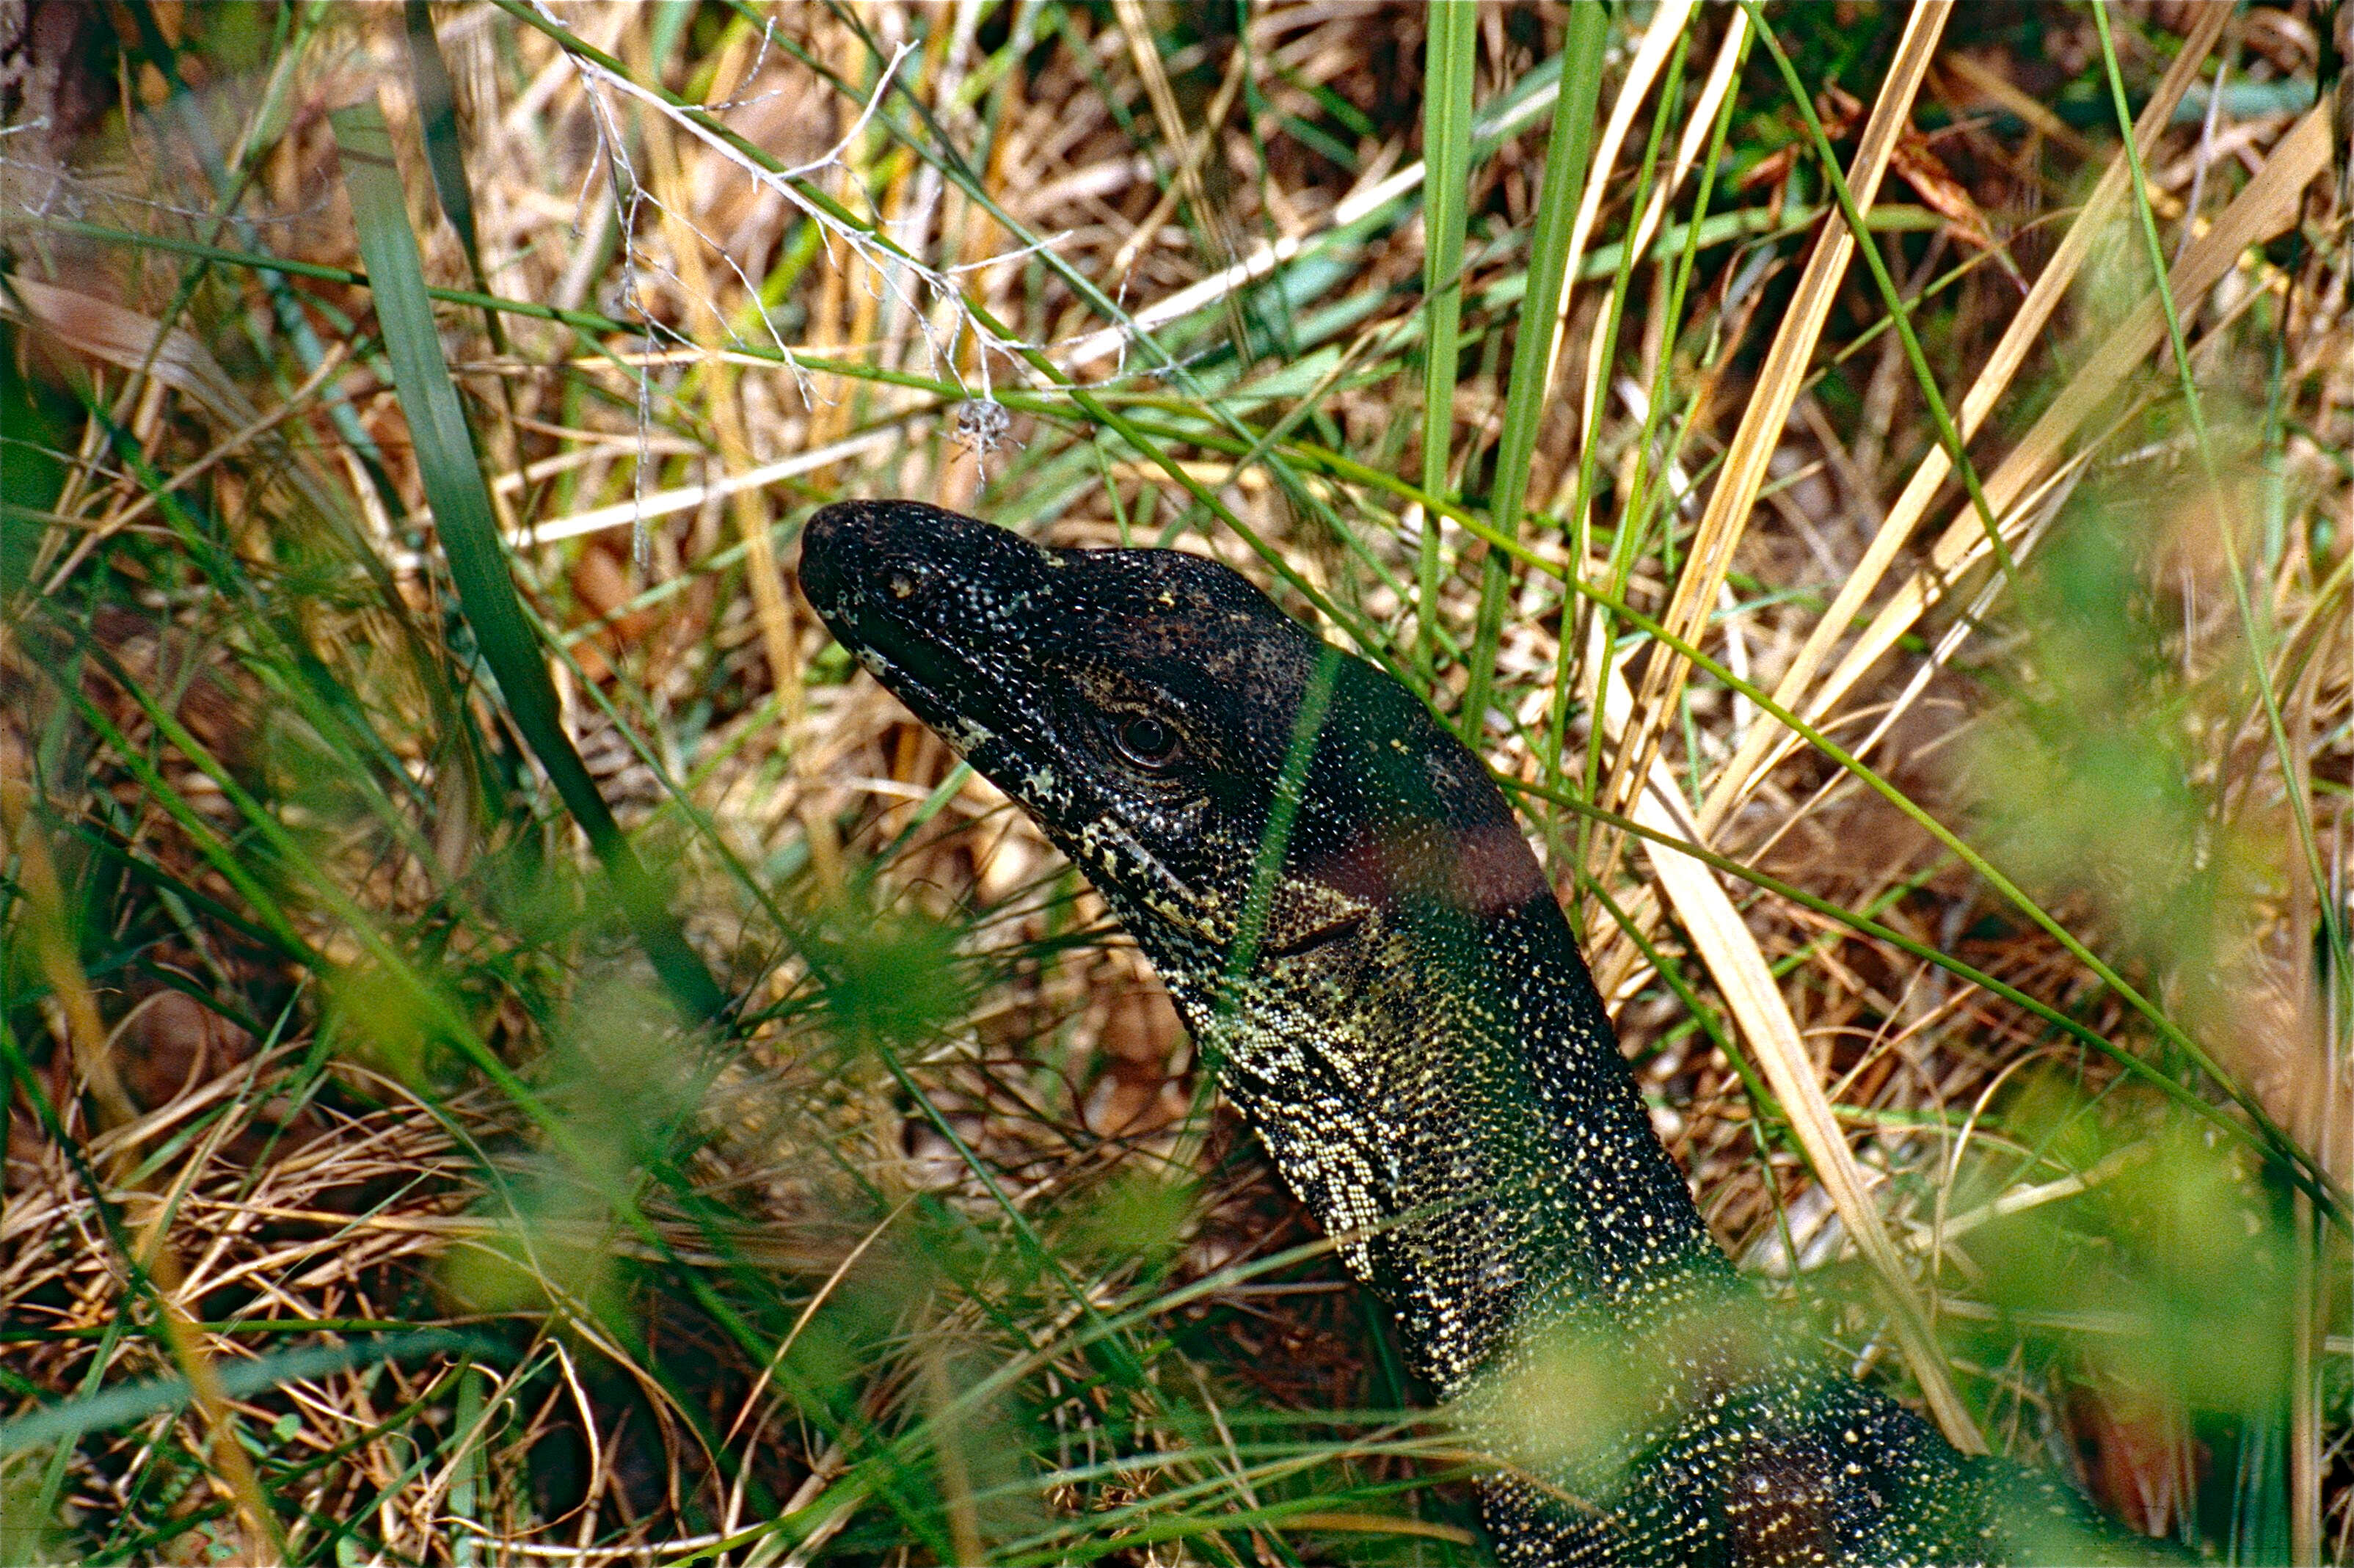 Image of monitor lizards